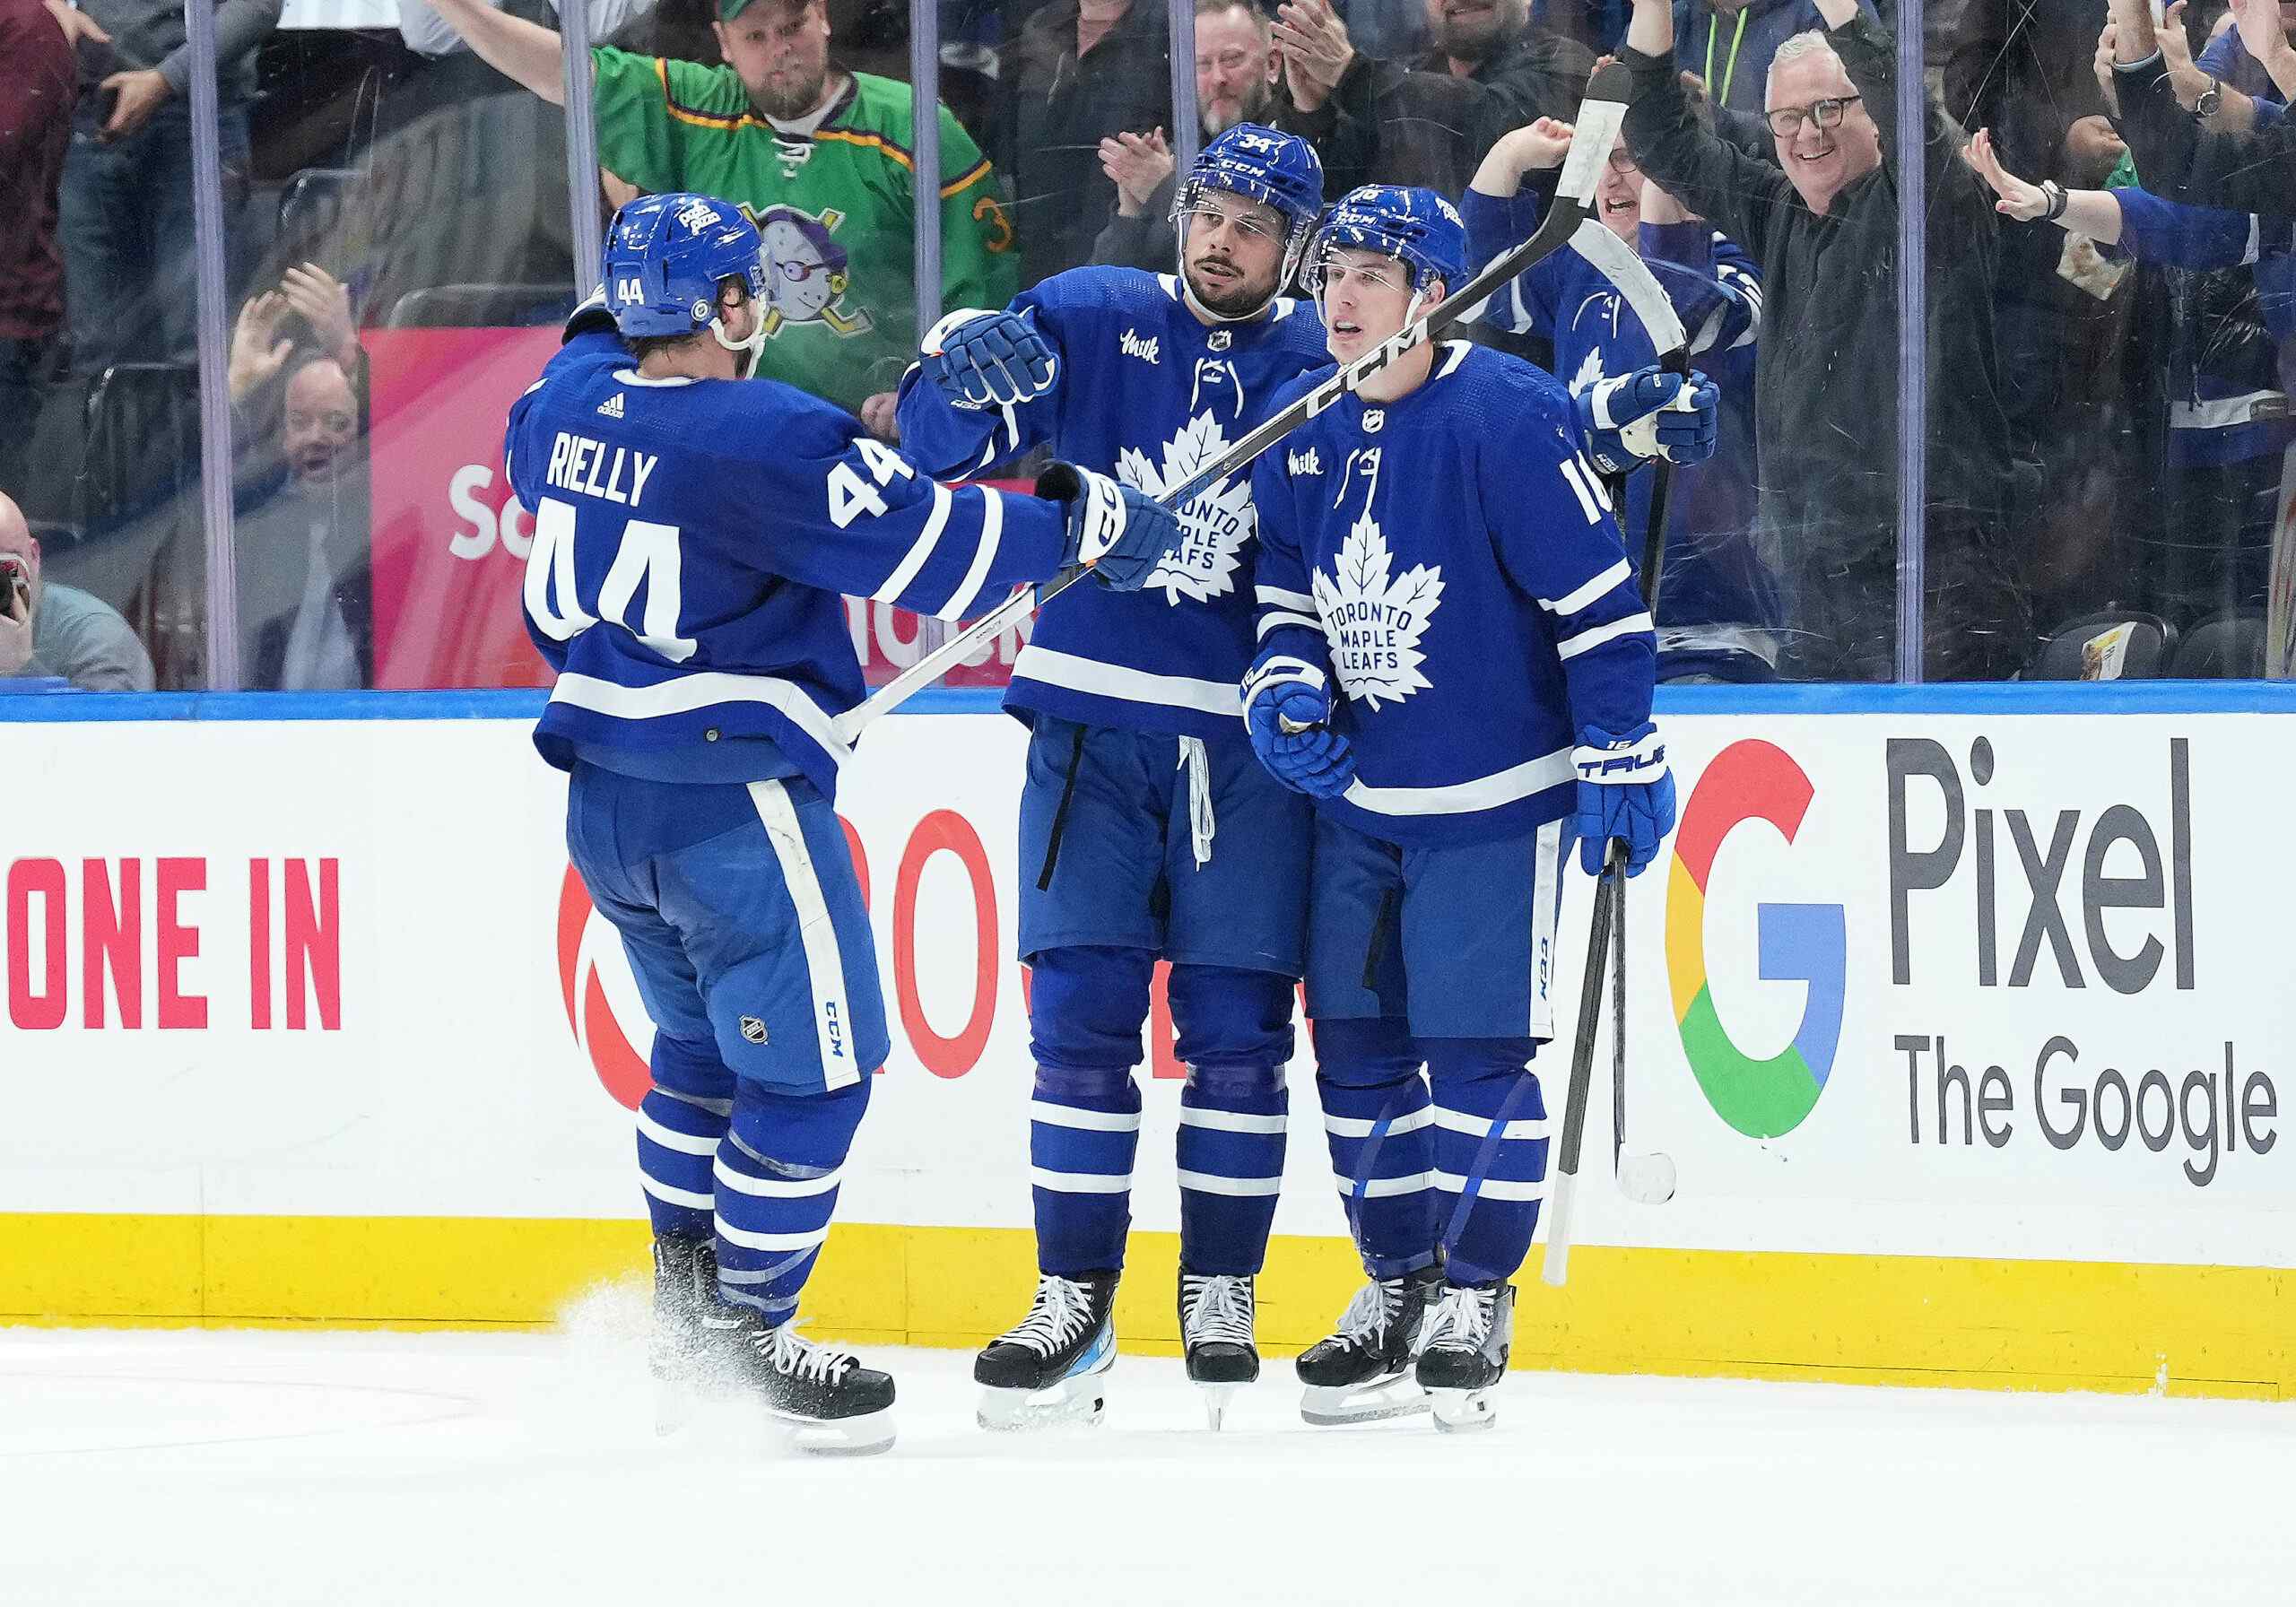 Maple Leafs win a more subdued match against Buffalo Sabres by 2-1 in OT -  The Globe and Mail